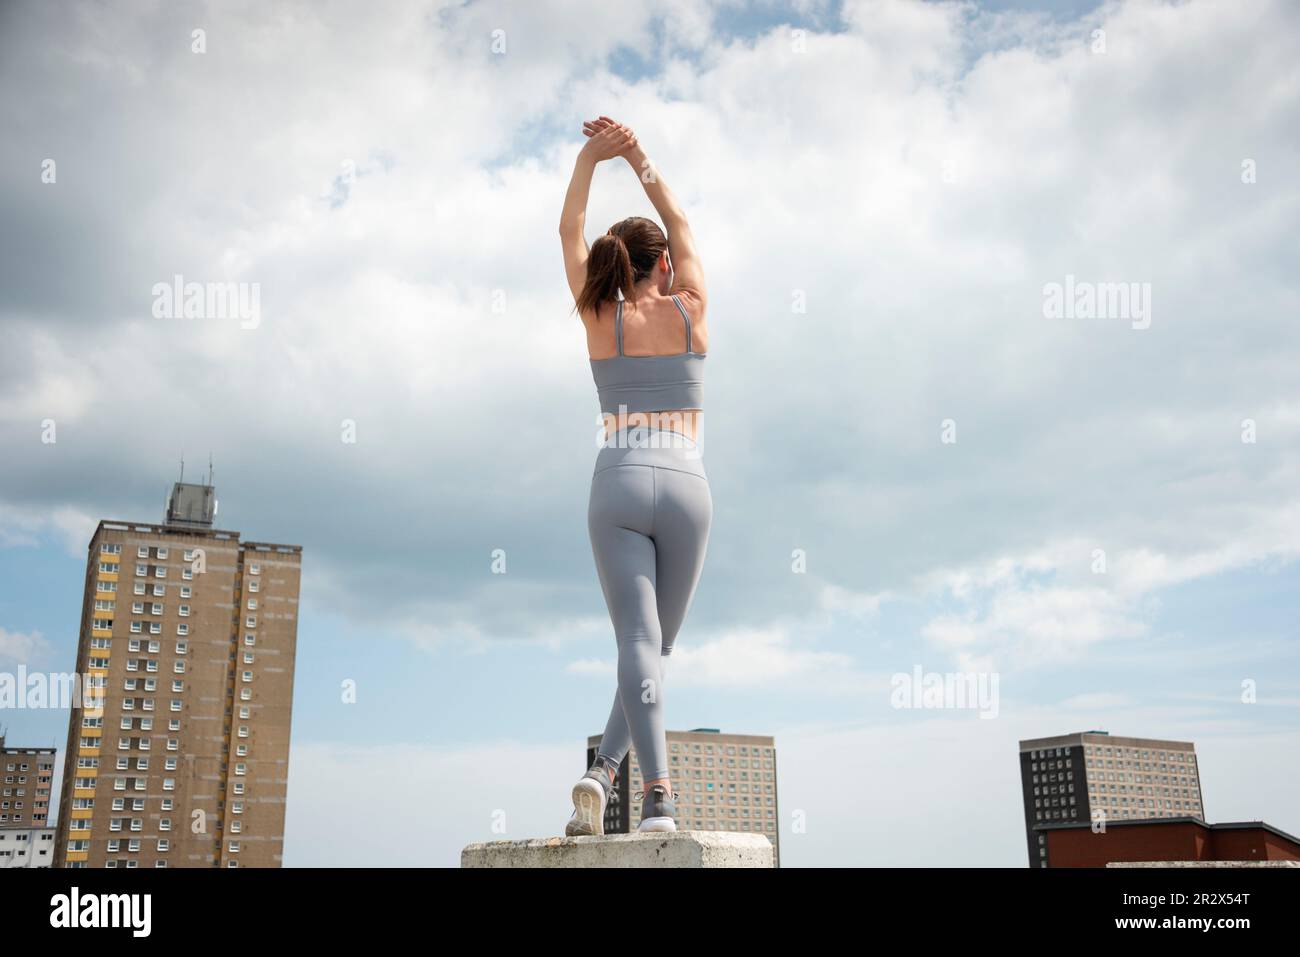 fit, sporty woman doing an arm stretch outside, outdoor exercise, urban setting. Stock Photo